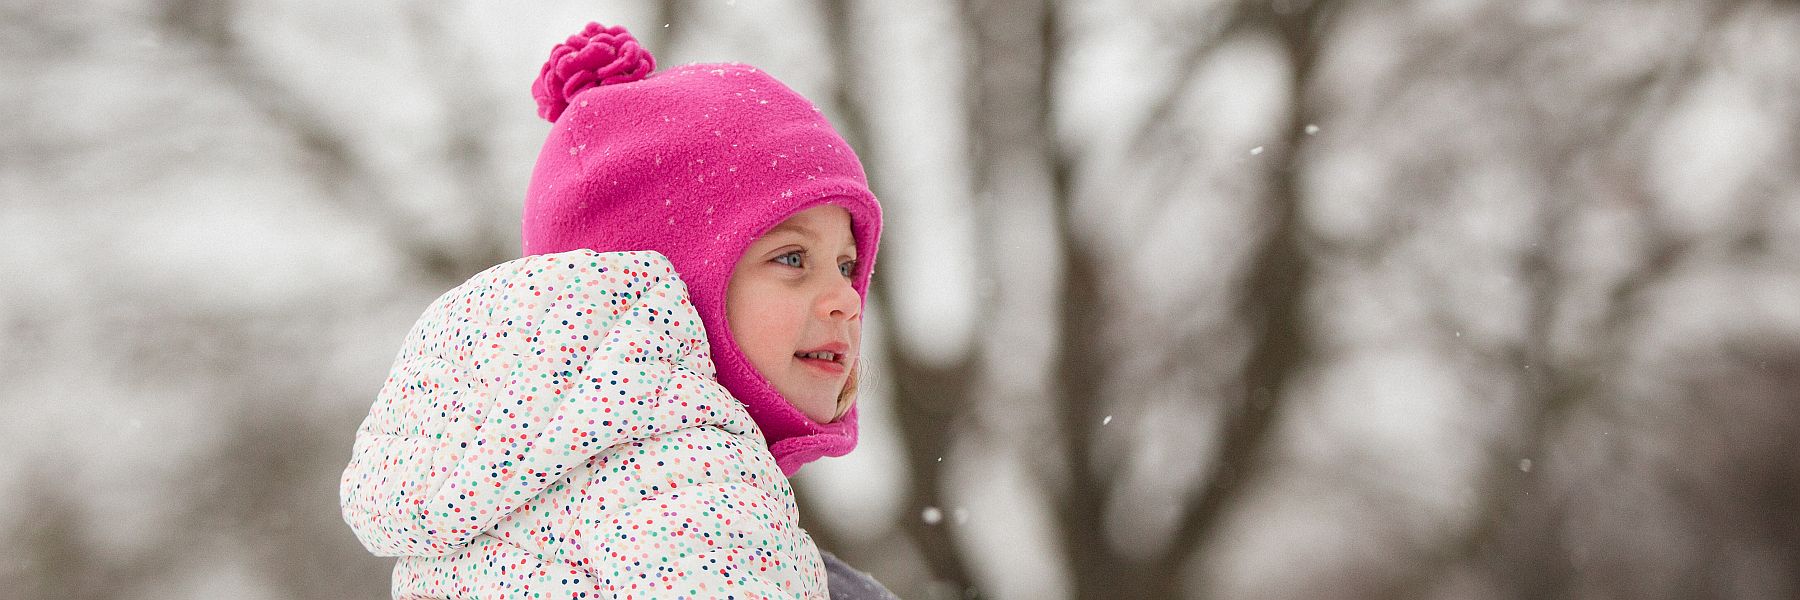 Encourage Outdoor play by dressing your kids in clothes engineered for warmth.  Puffin Gear Polartec Fleece Hats will keep your kids warm and dry.  Made in Canada for cold weather. Machine washable, quick dry. The best kids winter hats.  Blossom Hat